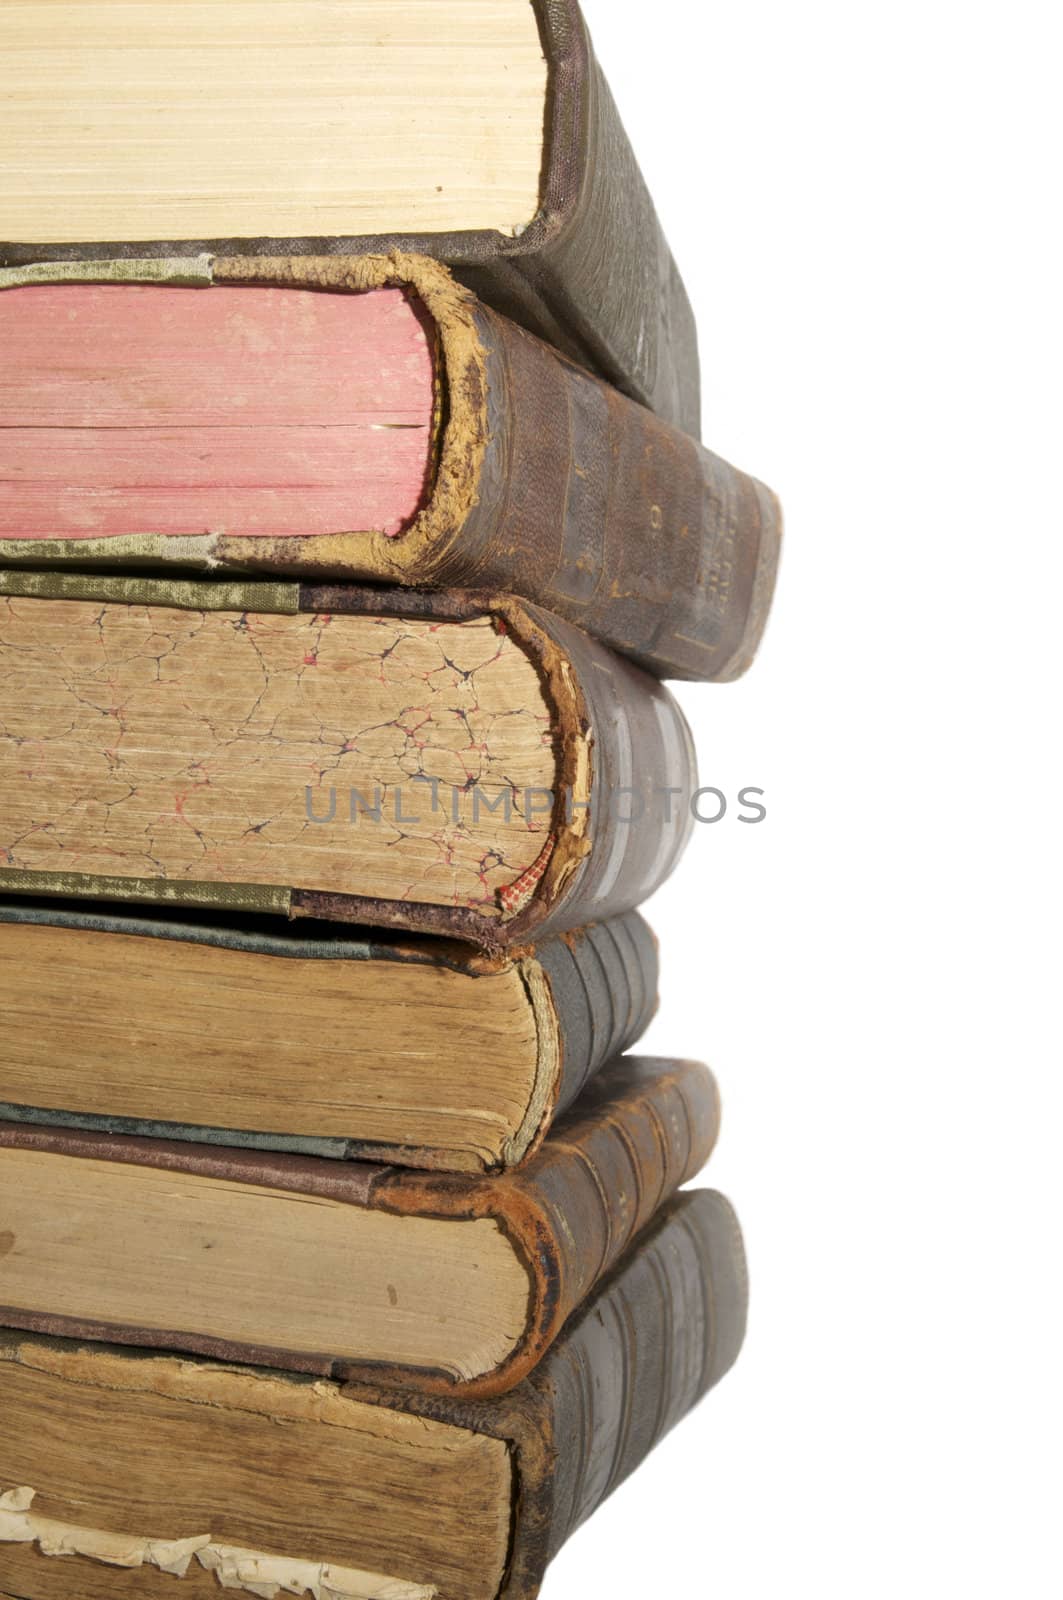 a very old book shot in close-up on a white background